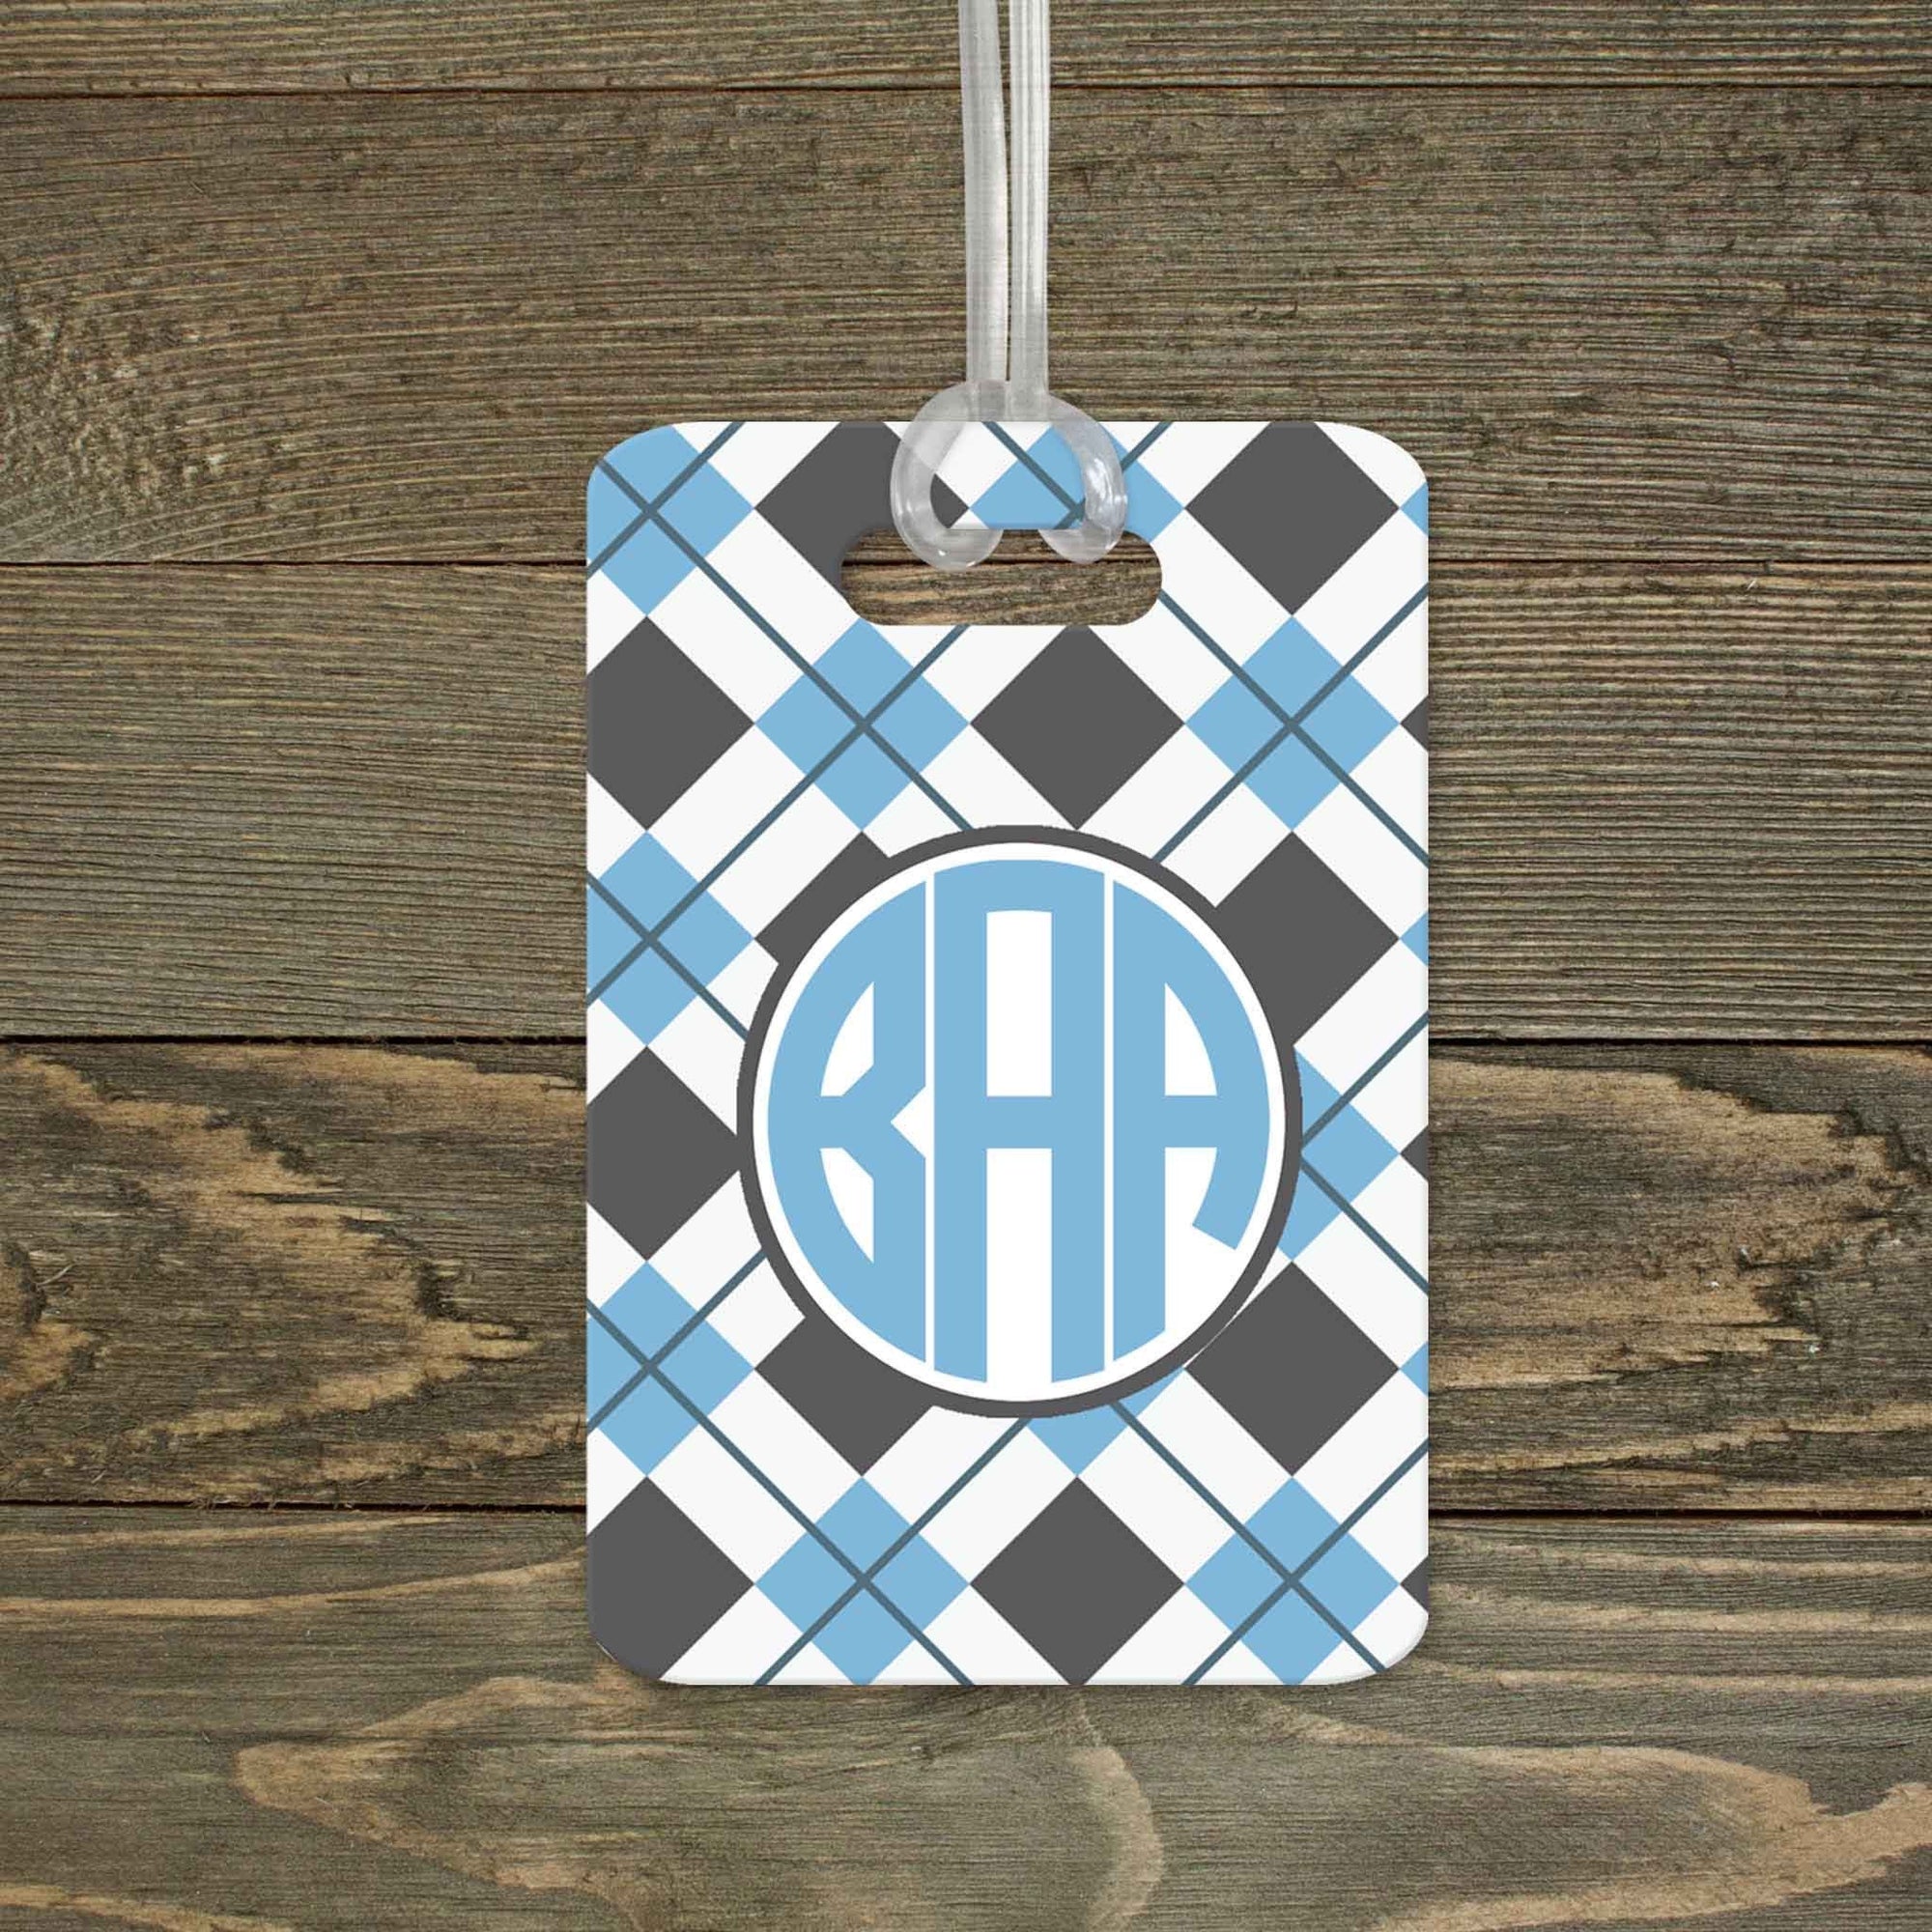 This & That Solutions - Personalized Luggage Tag | Custom Monogram Bag Tag | Light Blue Argyle - Personalized Gifts & Custom Home Decor